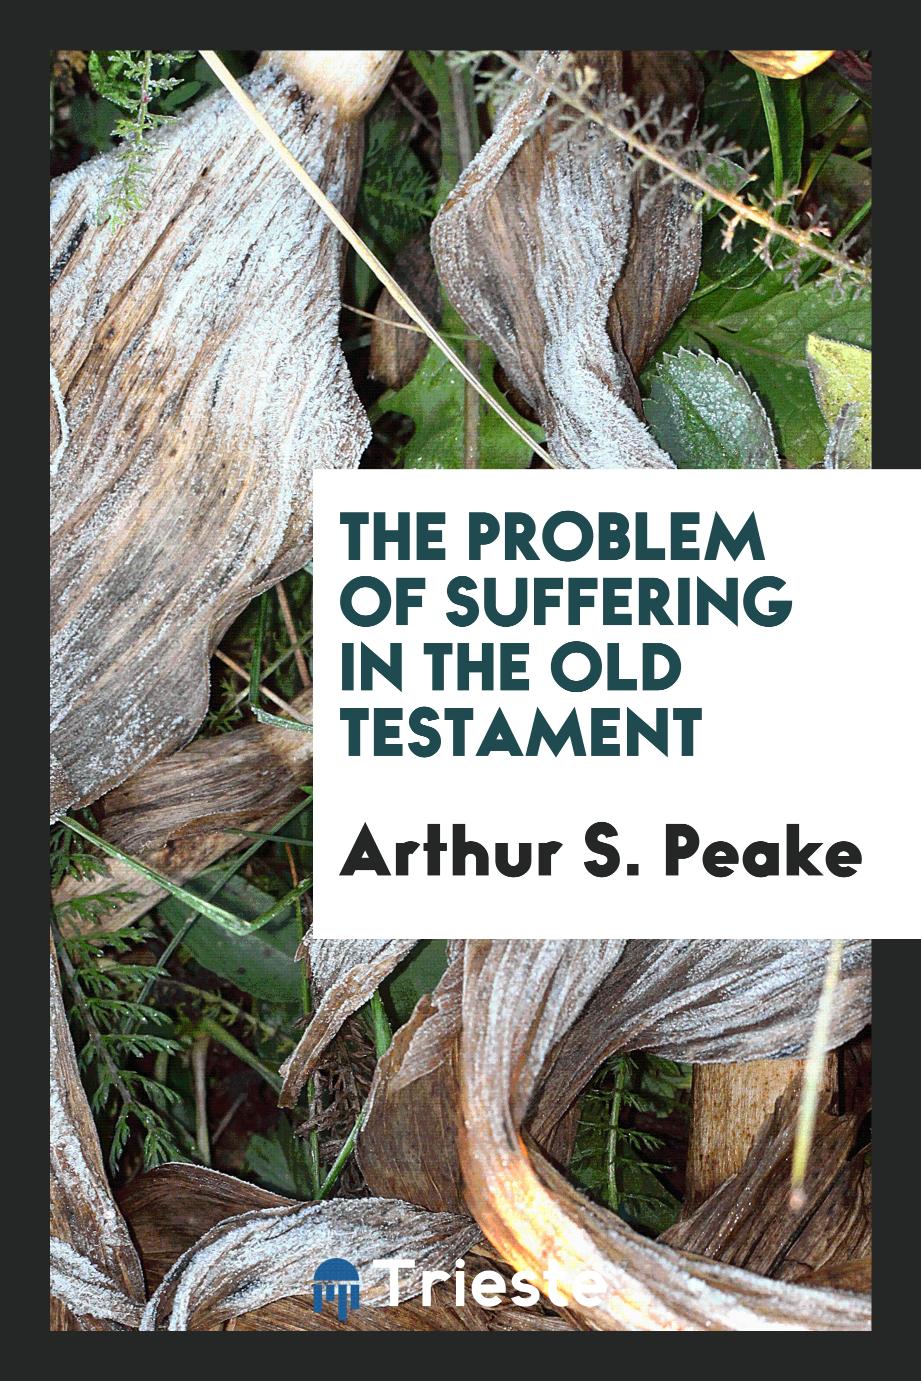 Arthur S. Peake - The problem of suffering in the Old Testament